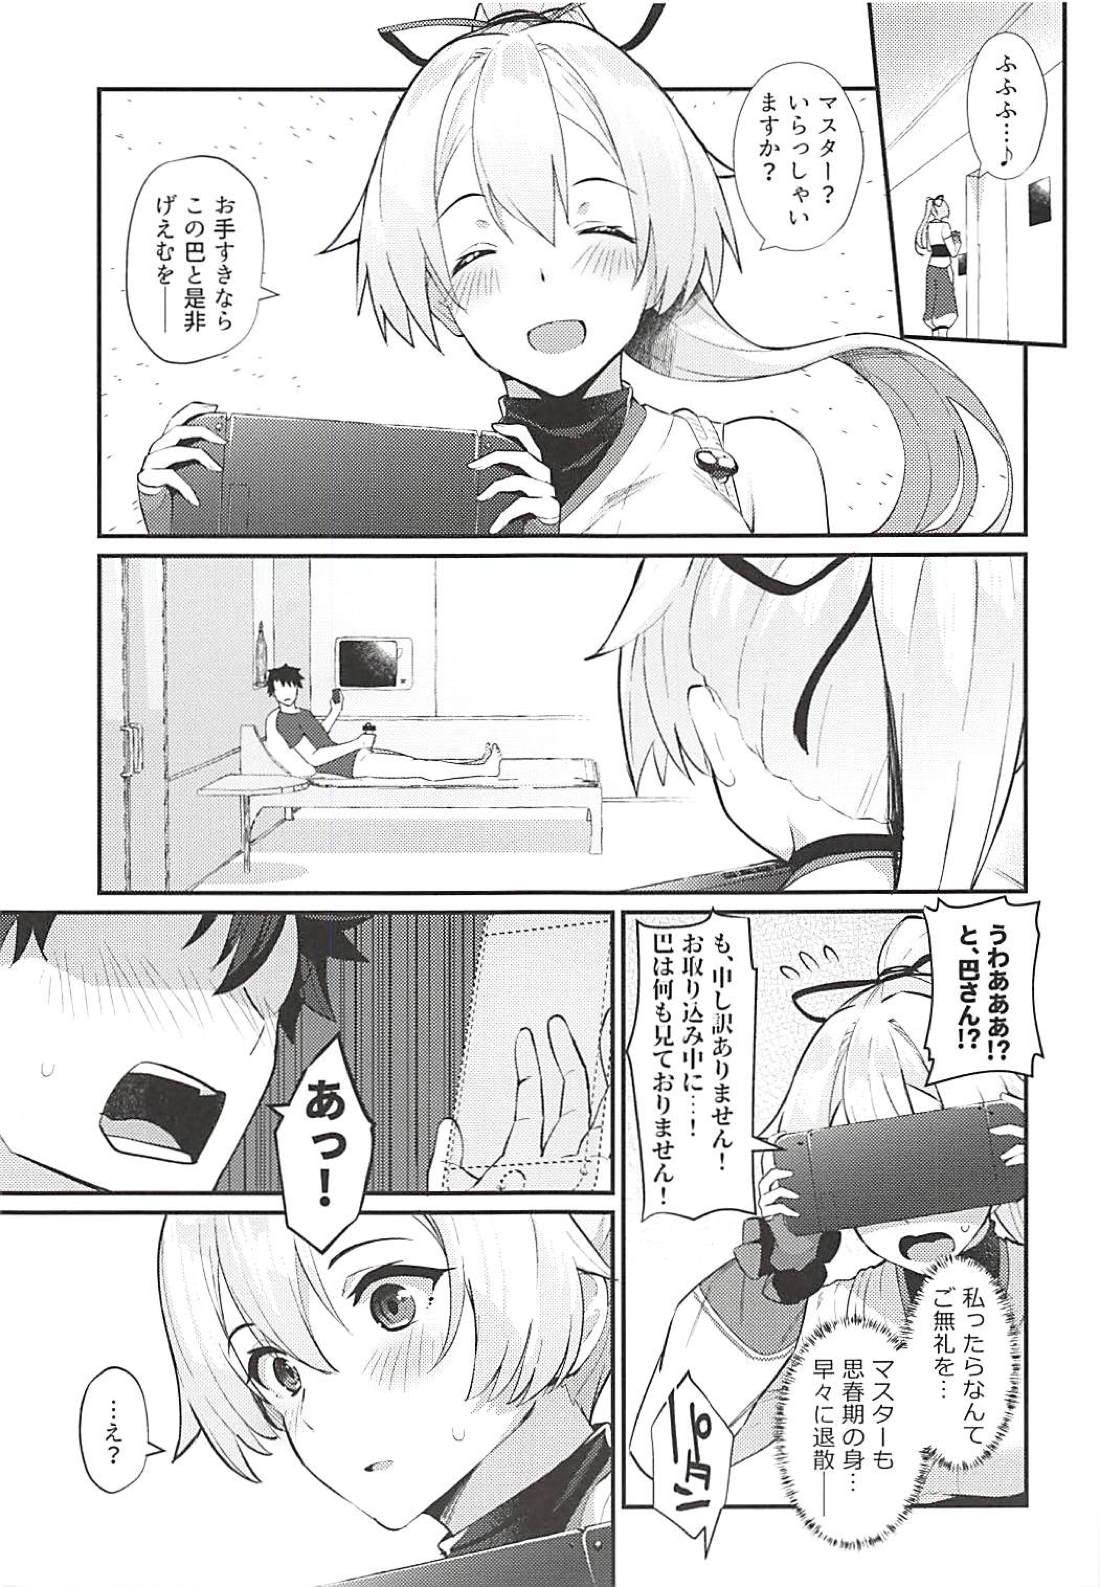 Tiny Omoe Jigoku - Fate grand order Clothed Sex - Page 2